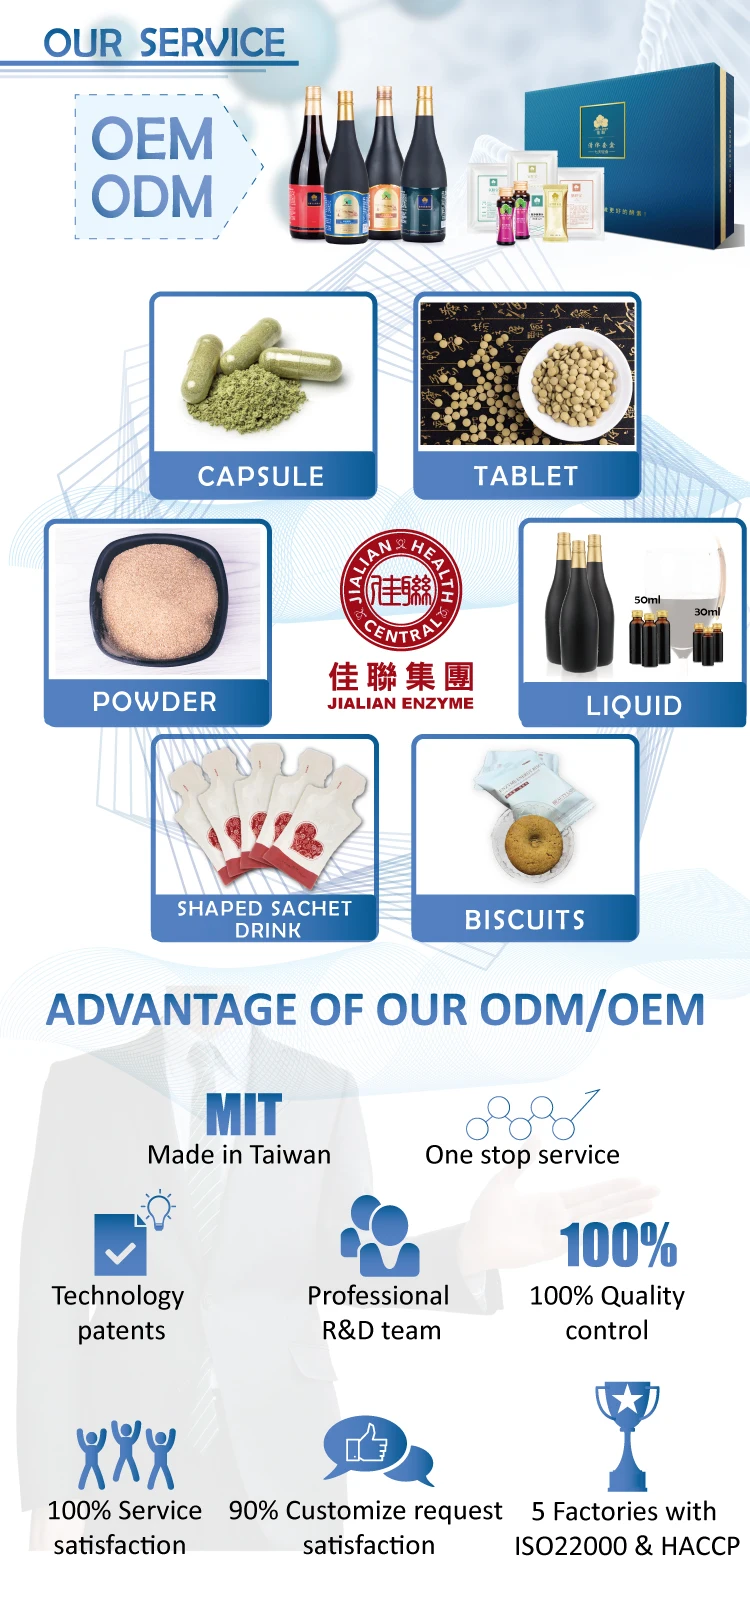 3. OEMODM-OUR-SERVICE